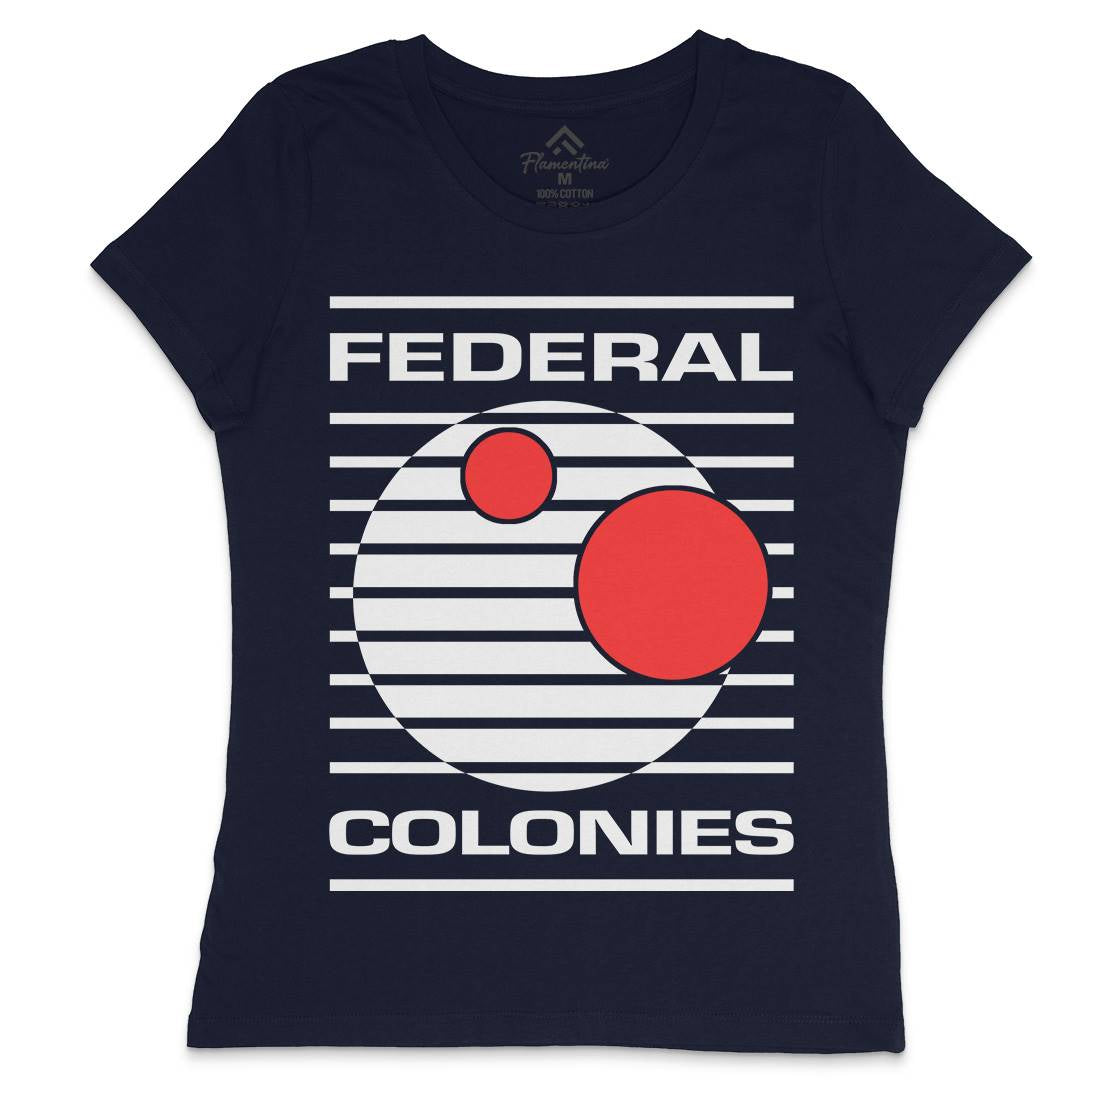 Federal Colonies Womens Crew Neck T-Shirt Space D409